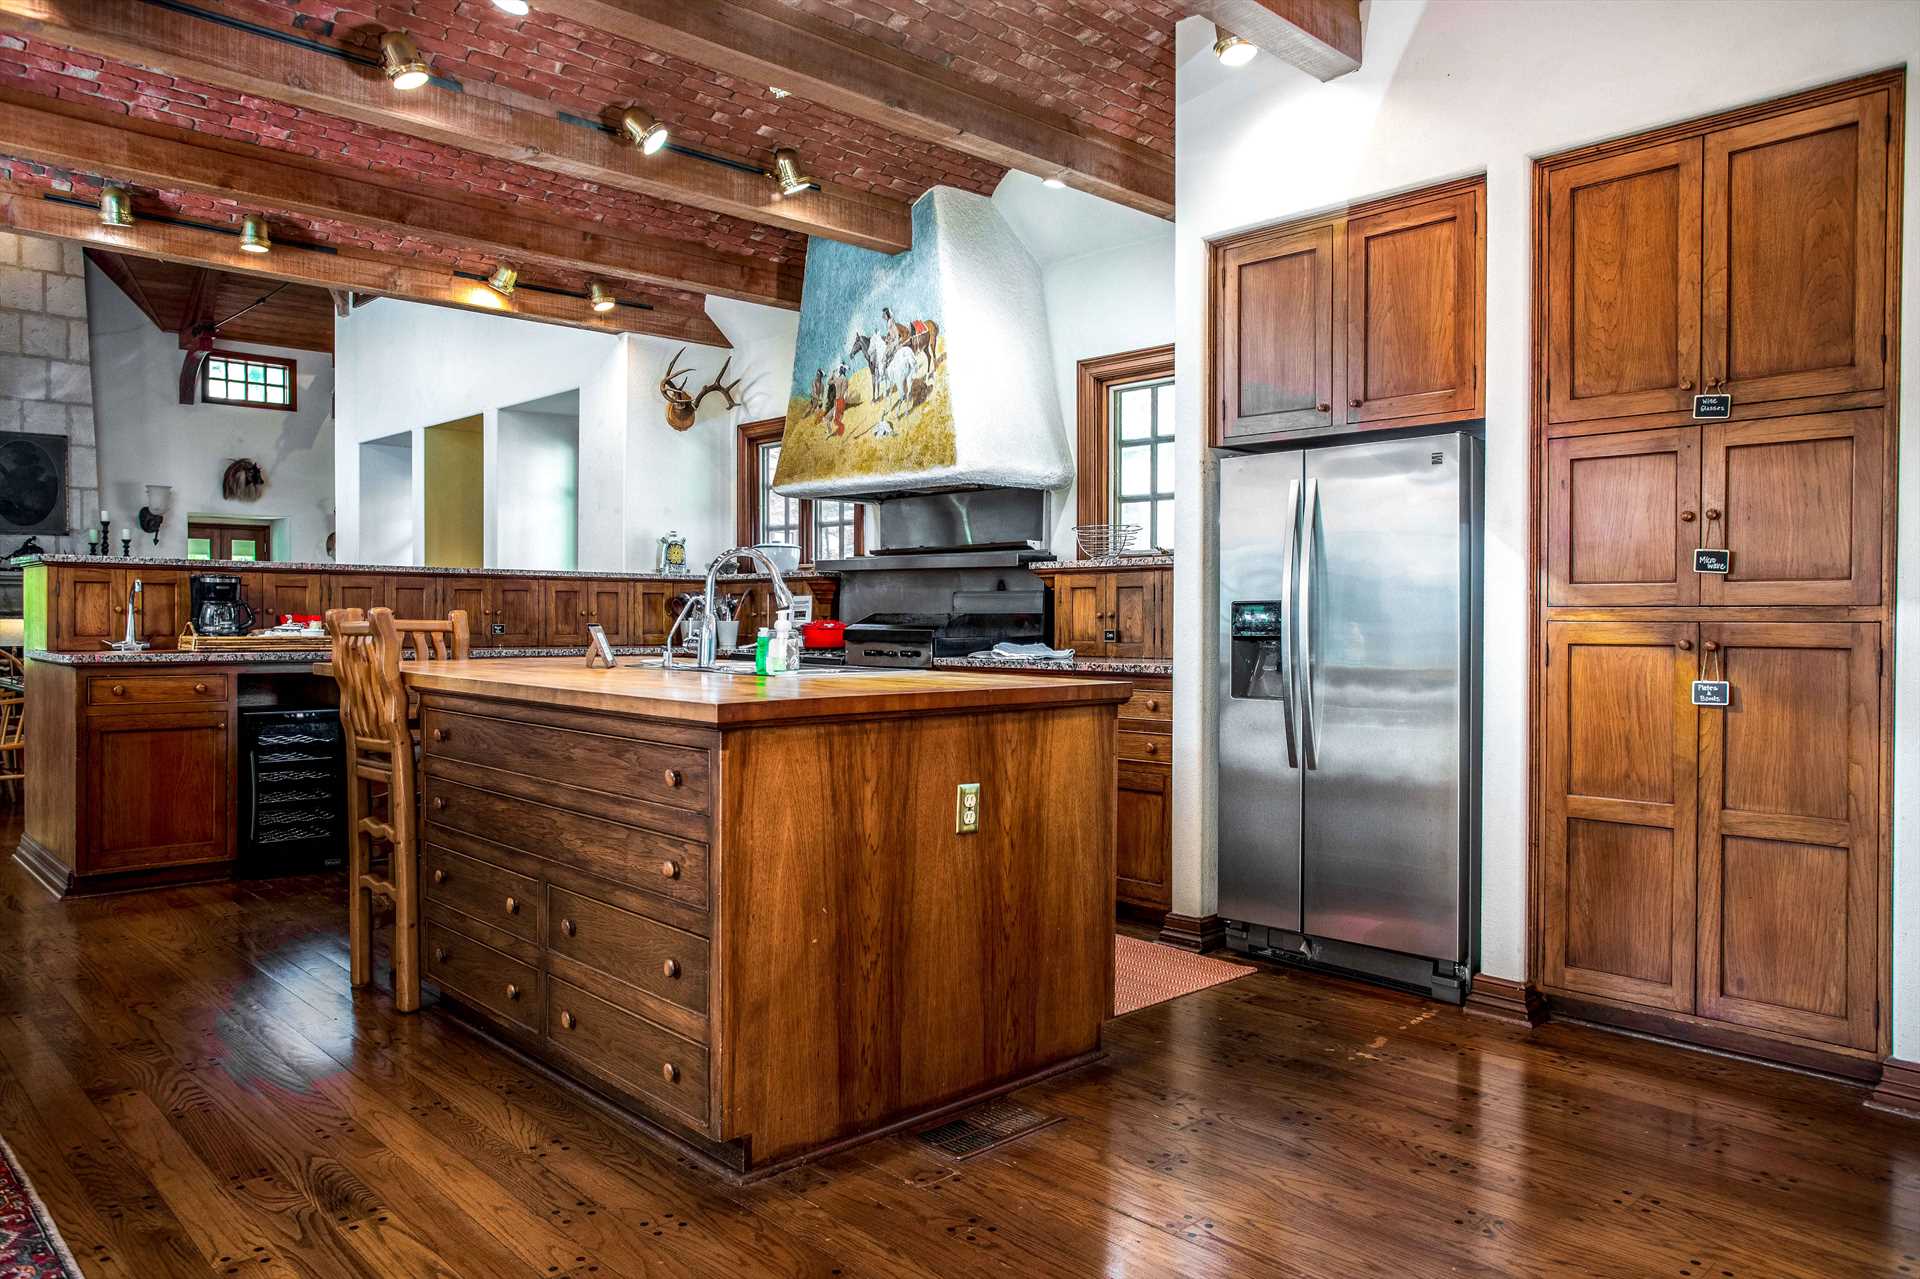                                                 Visitors here love the woodwork throughout the Homestead, and the wide-open accessibility to its enormous kitchen, too!